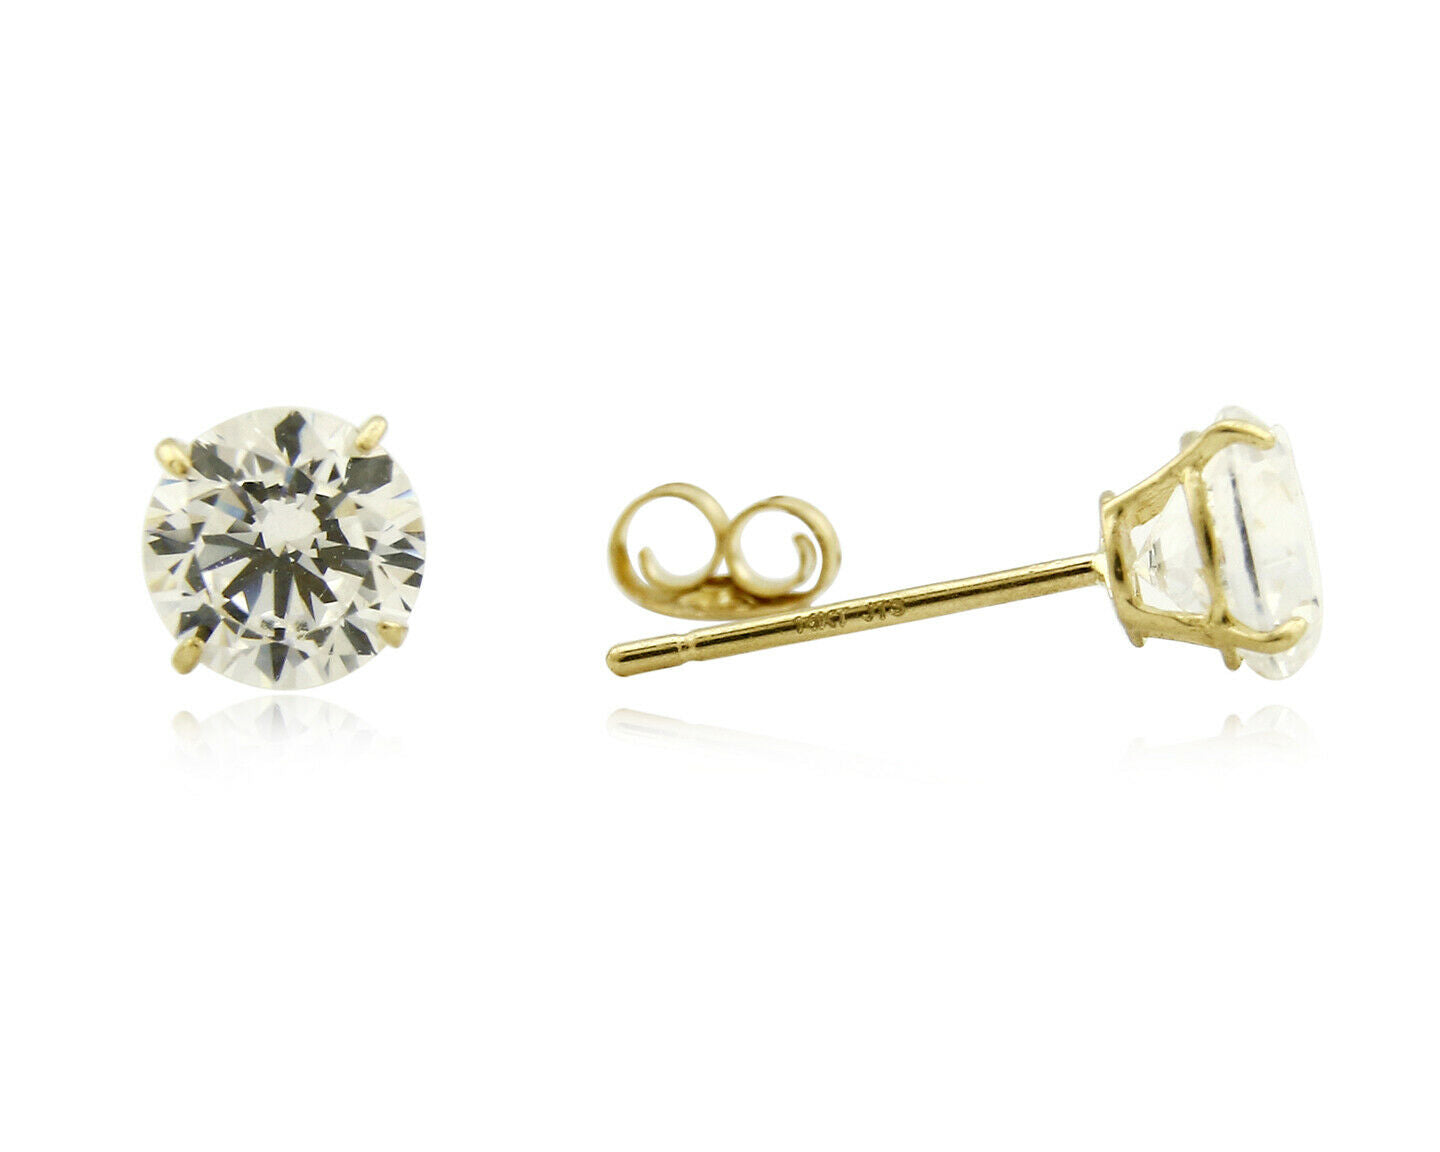 SOLID 14k Yellow Gold 5.0mm Wide Top Grade CZ Pushback Stud Earrings